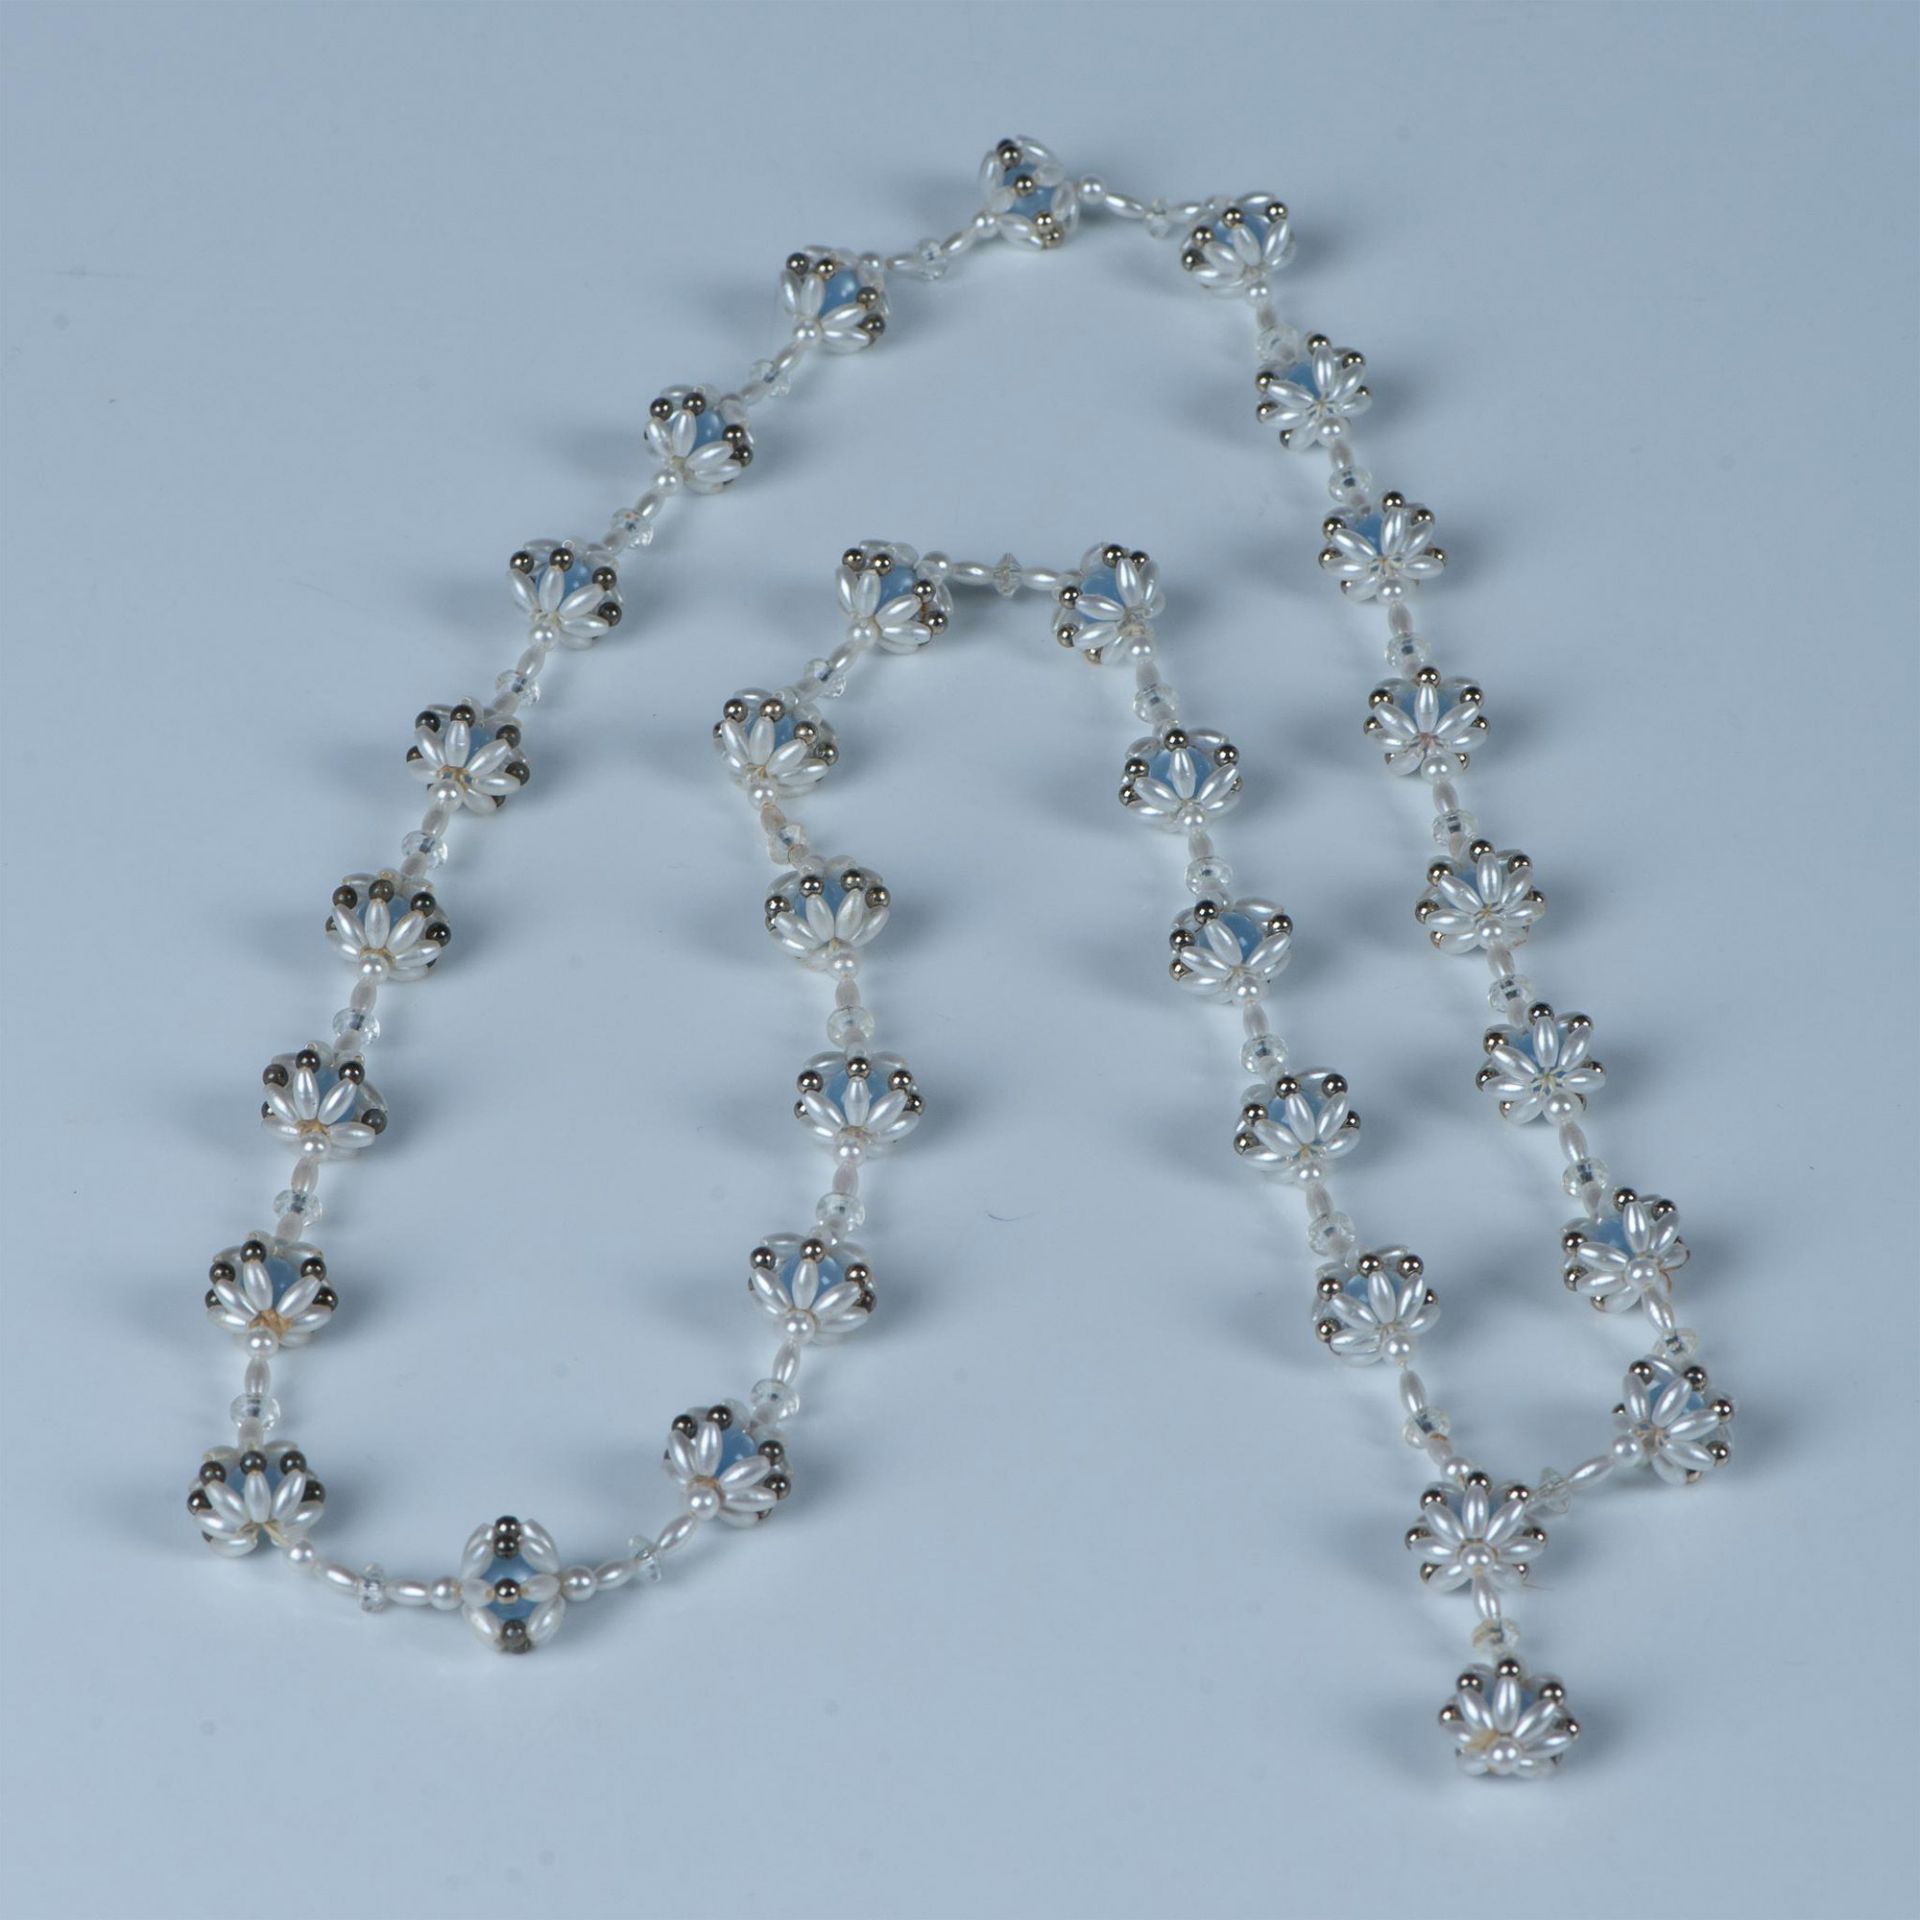 Elegant Long Faux Pearl Bead Cluster Necklace - Image 4 of 5